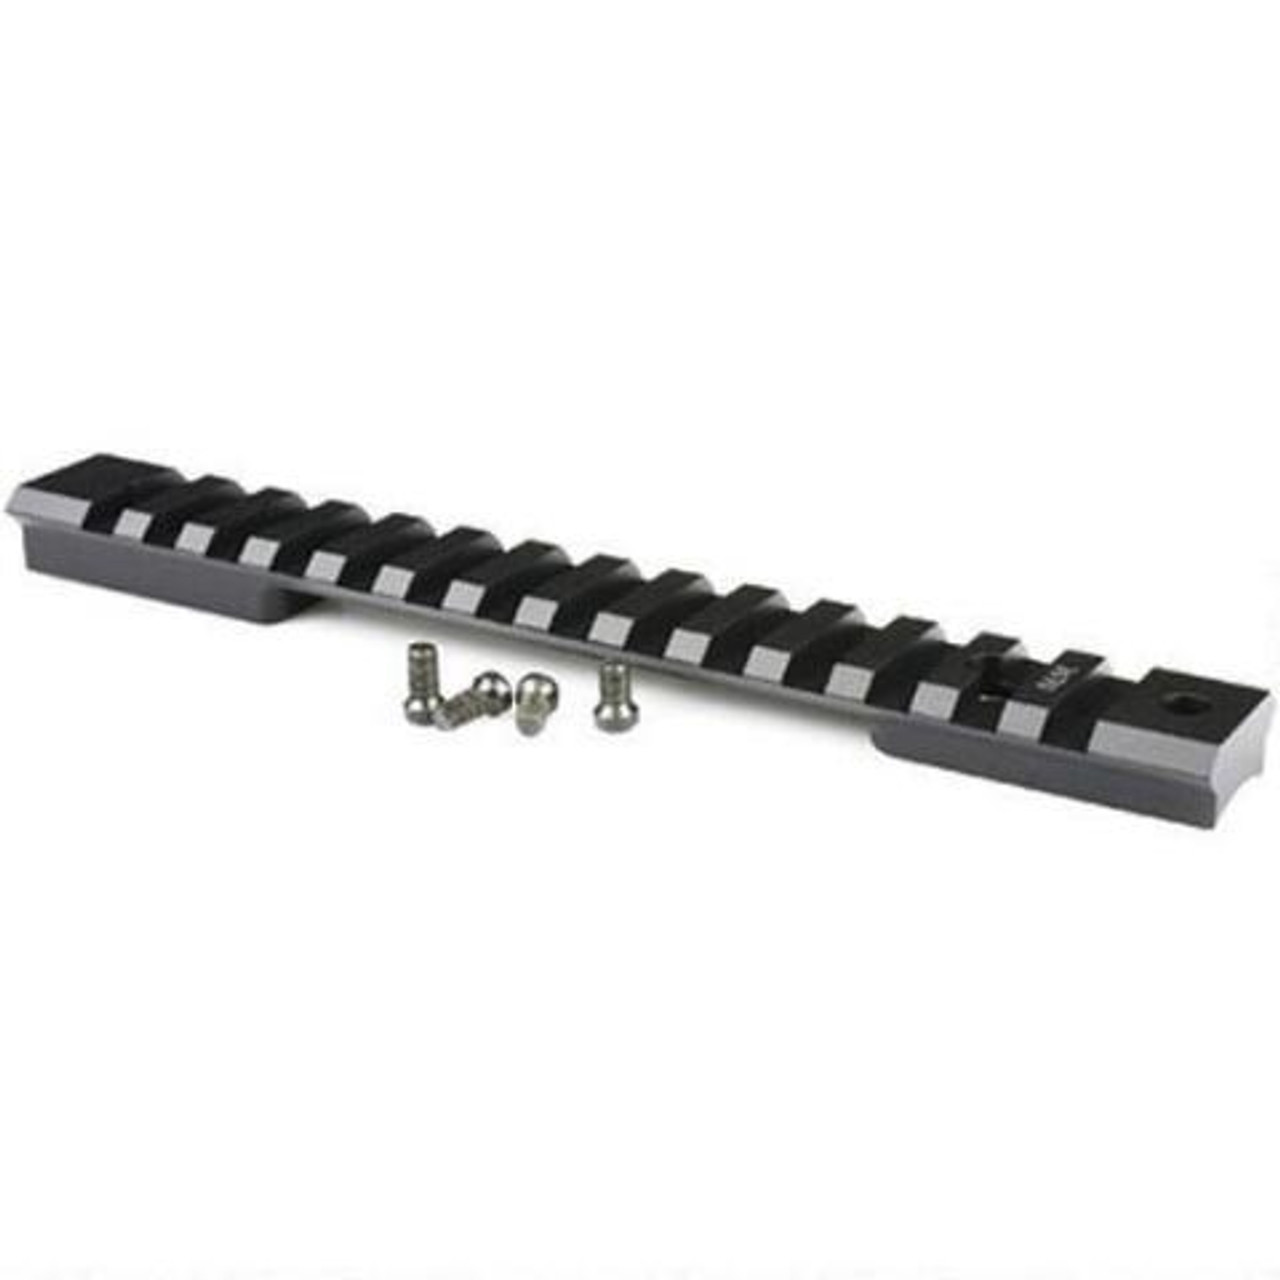 Warne XP Tactical Ruger American Short Action 1 pc Rail